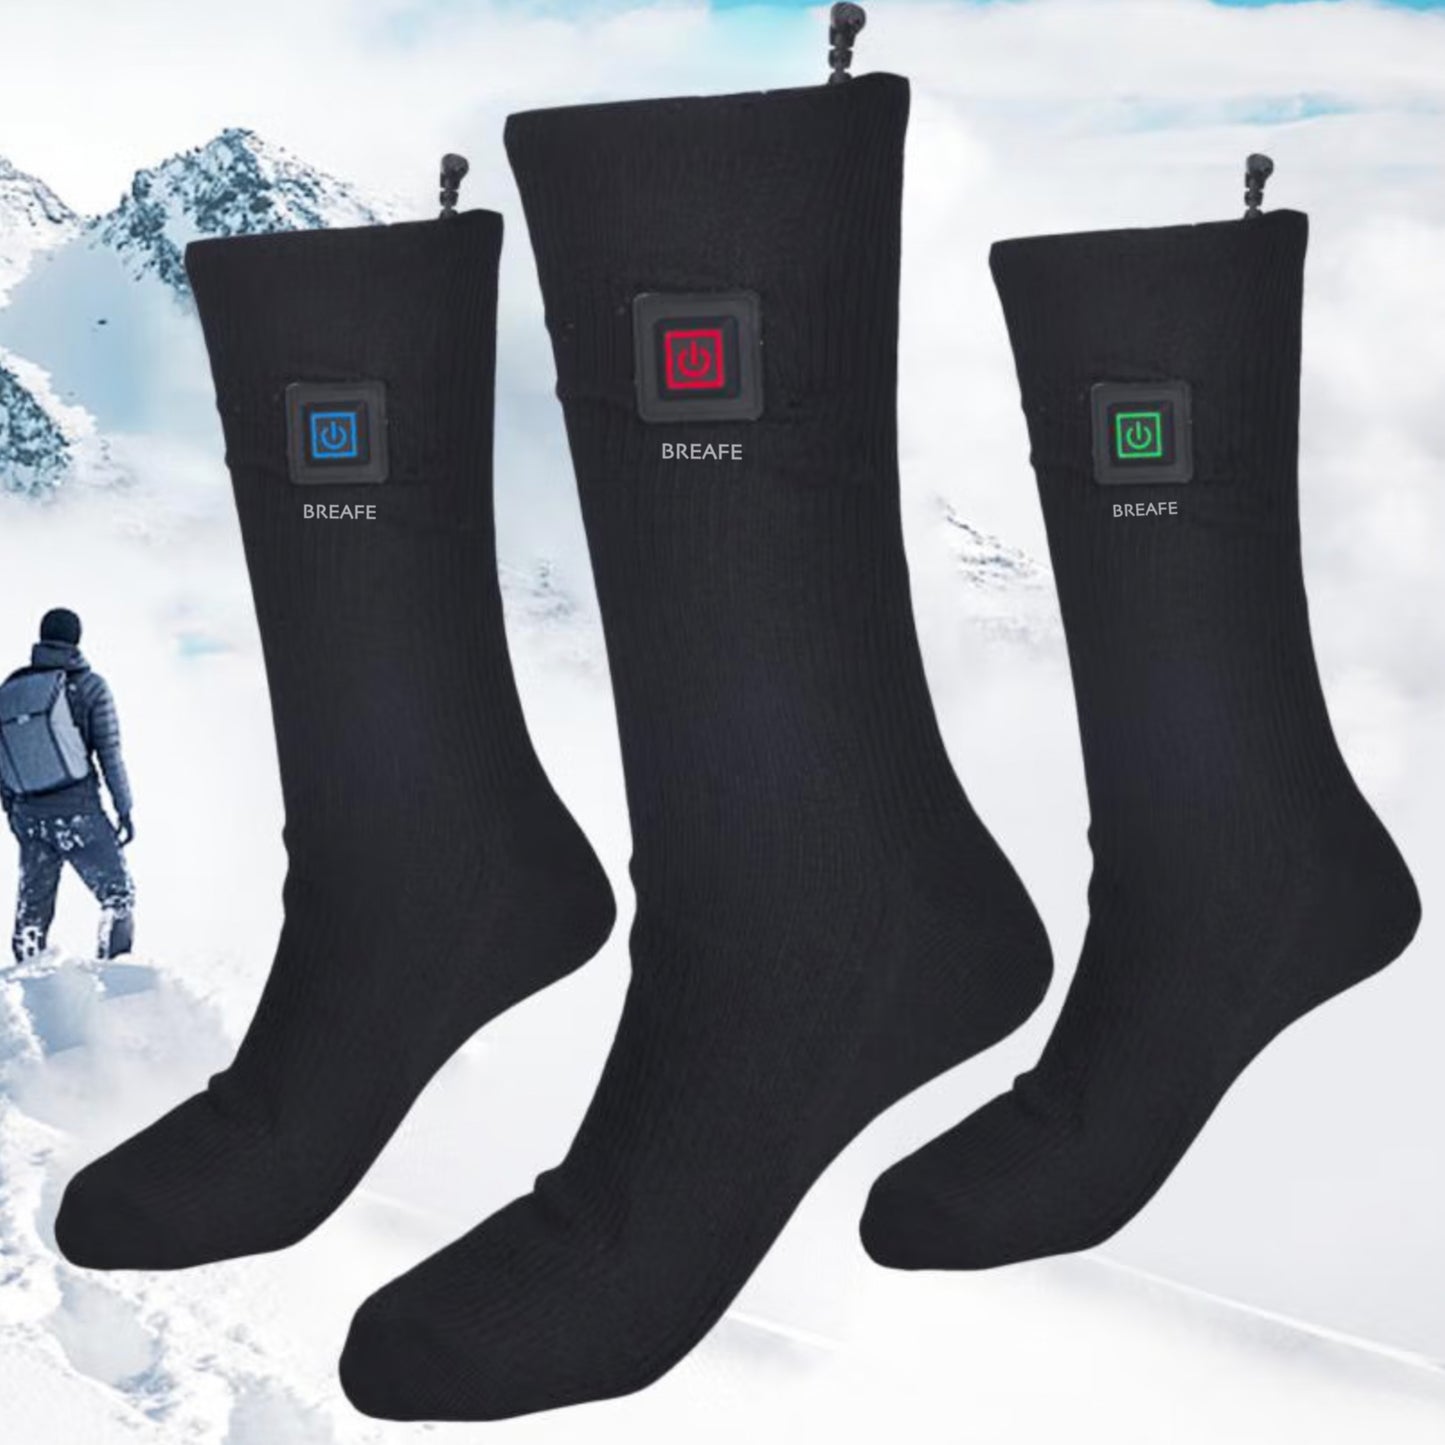 BREAFE Heated Socks for Men Women Socks Electrically Heated Electric pocket warmers for warming hands